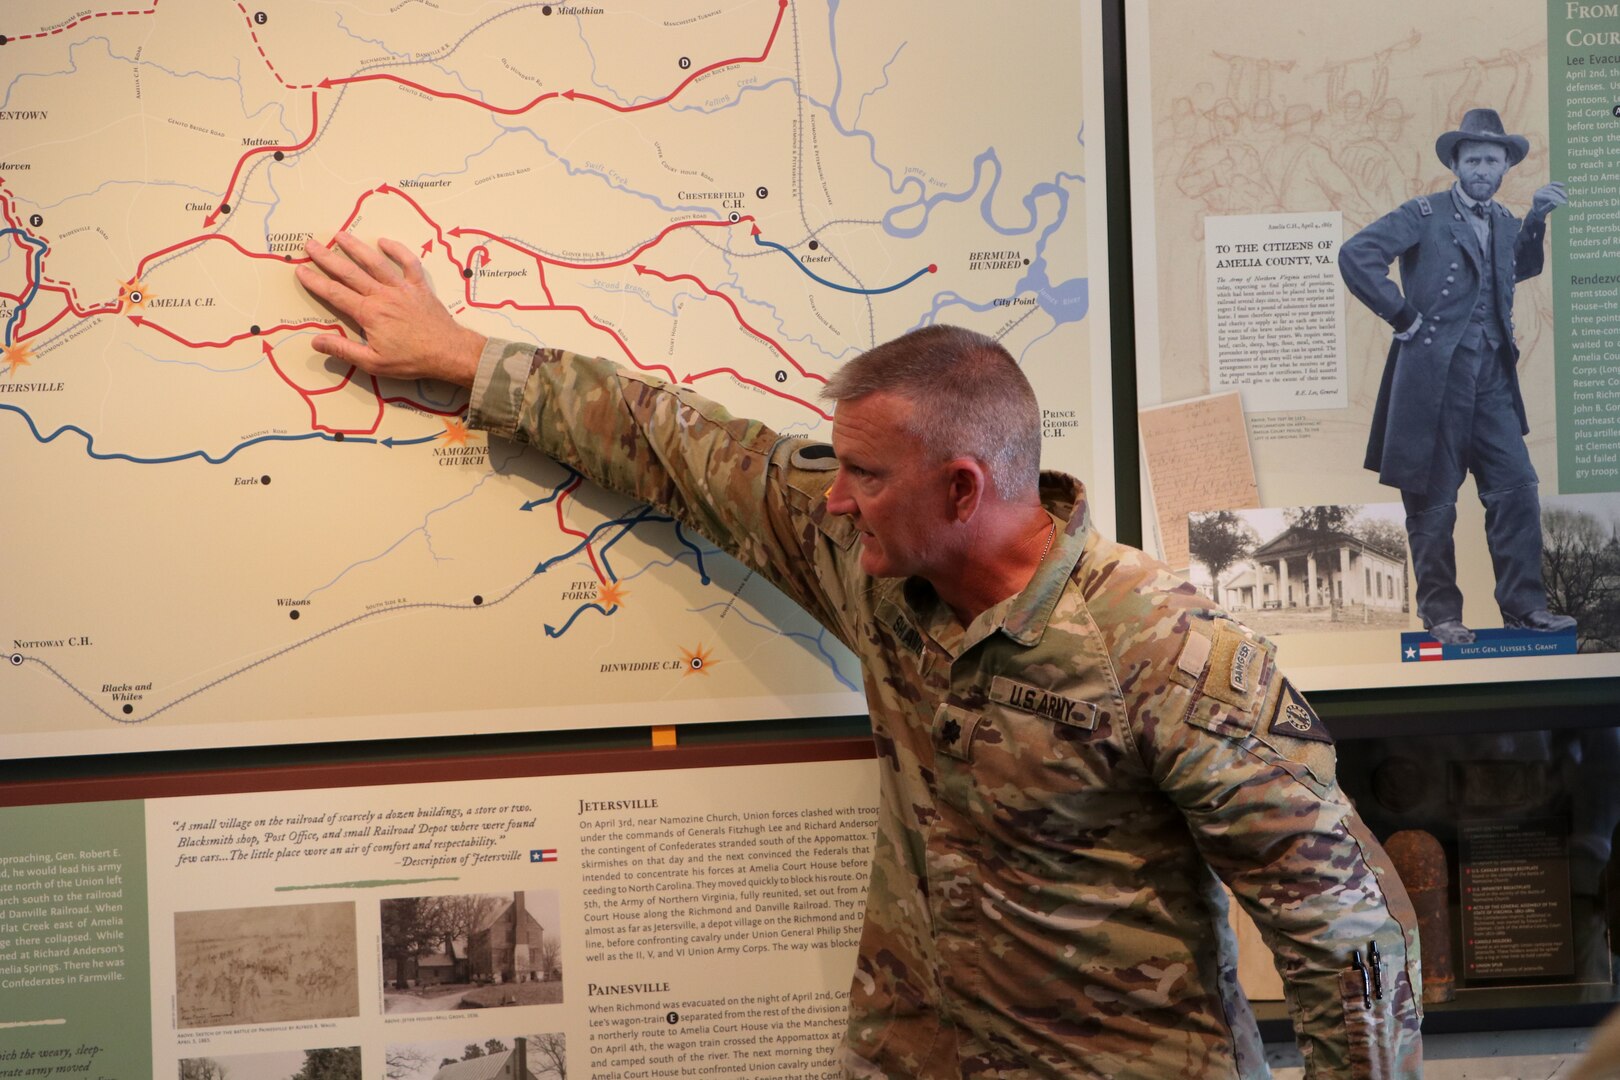 MTC leaders gain historical insights during staff ride